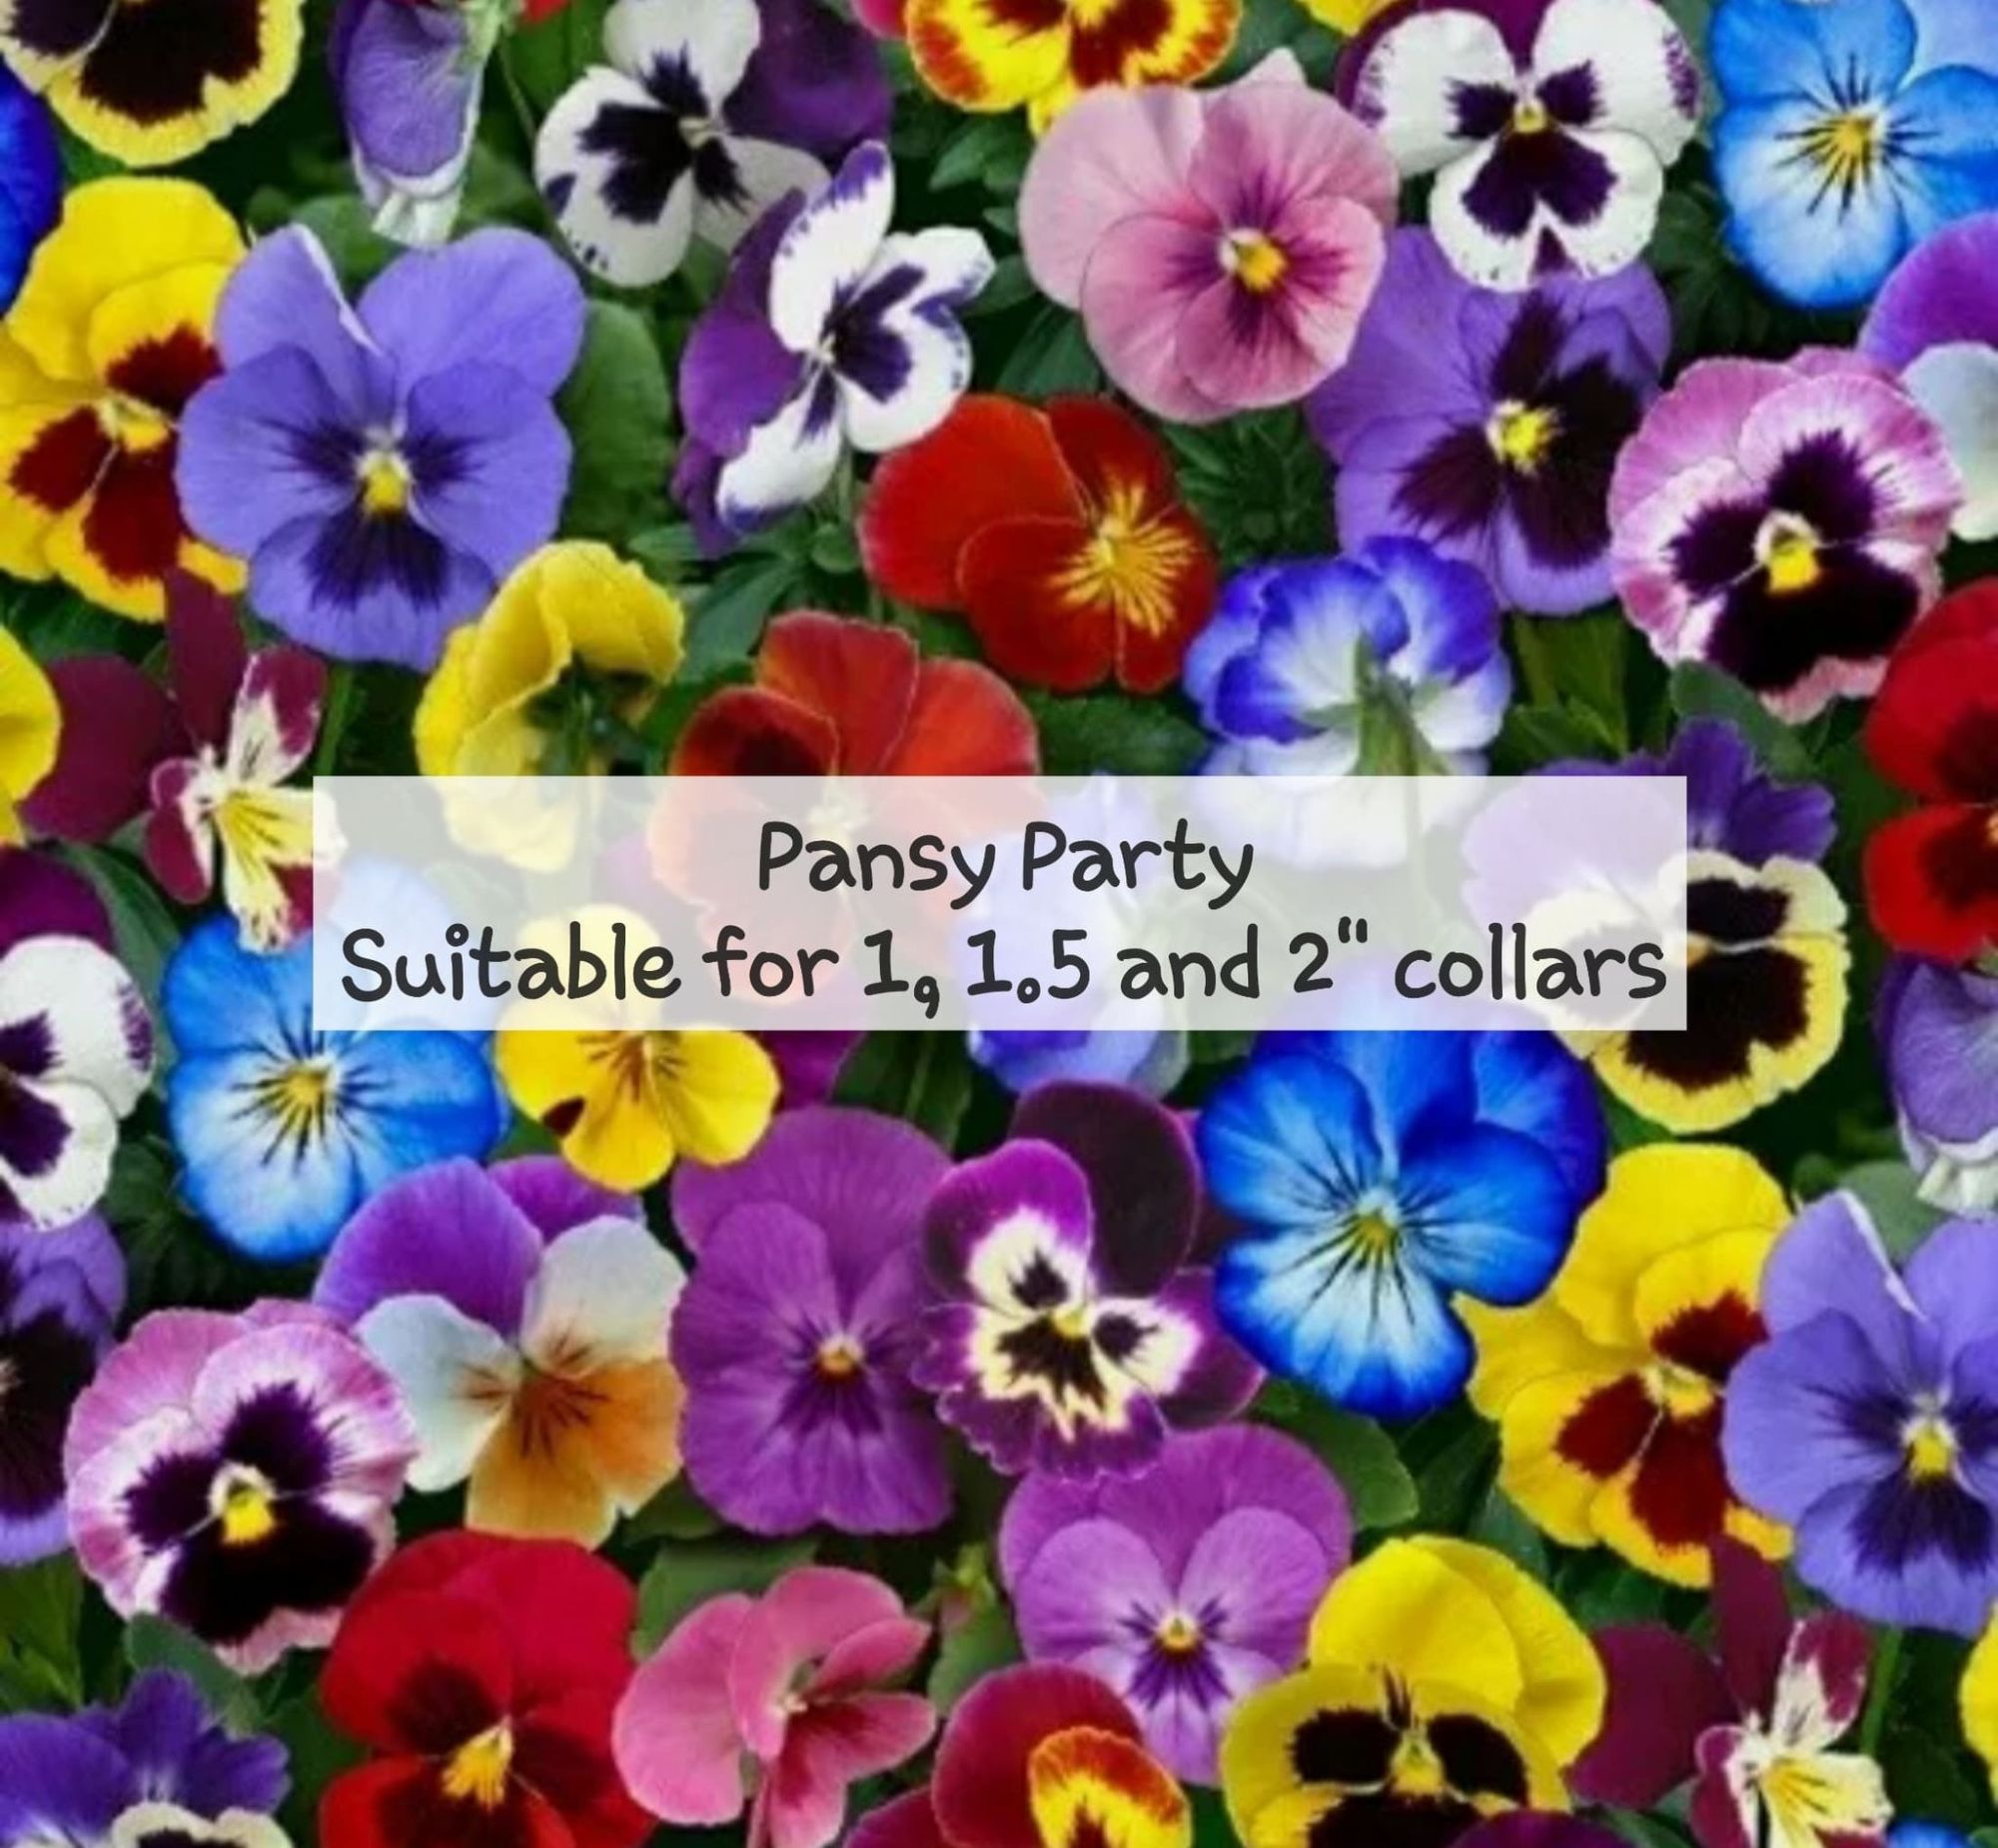 pansy party